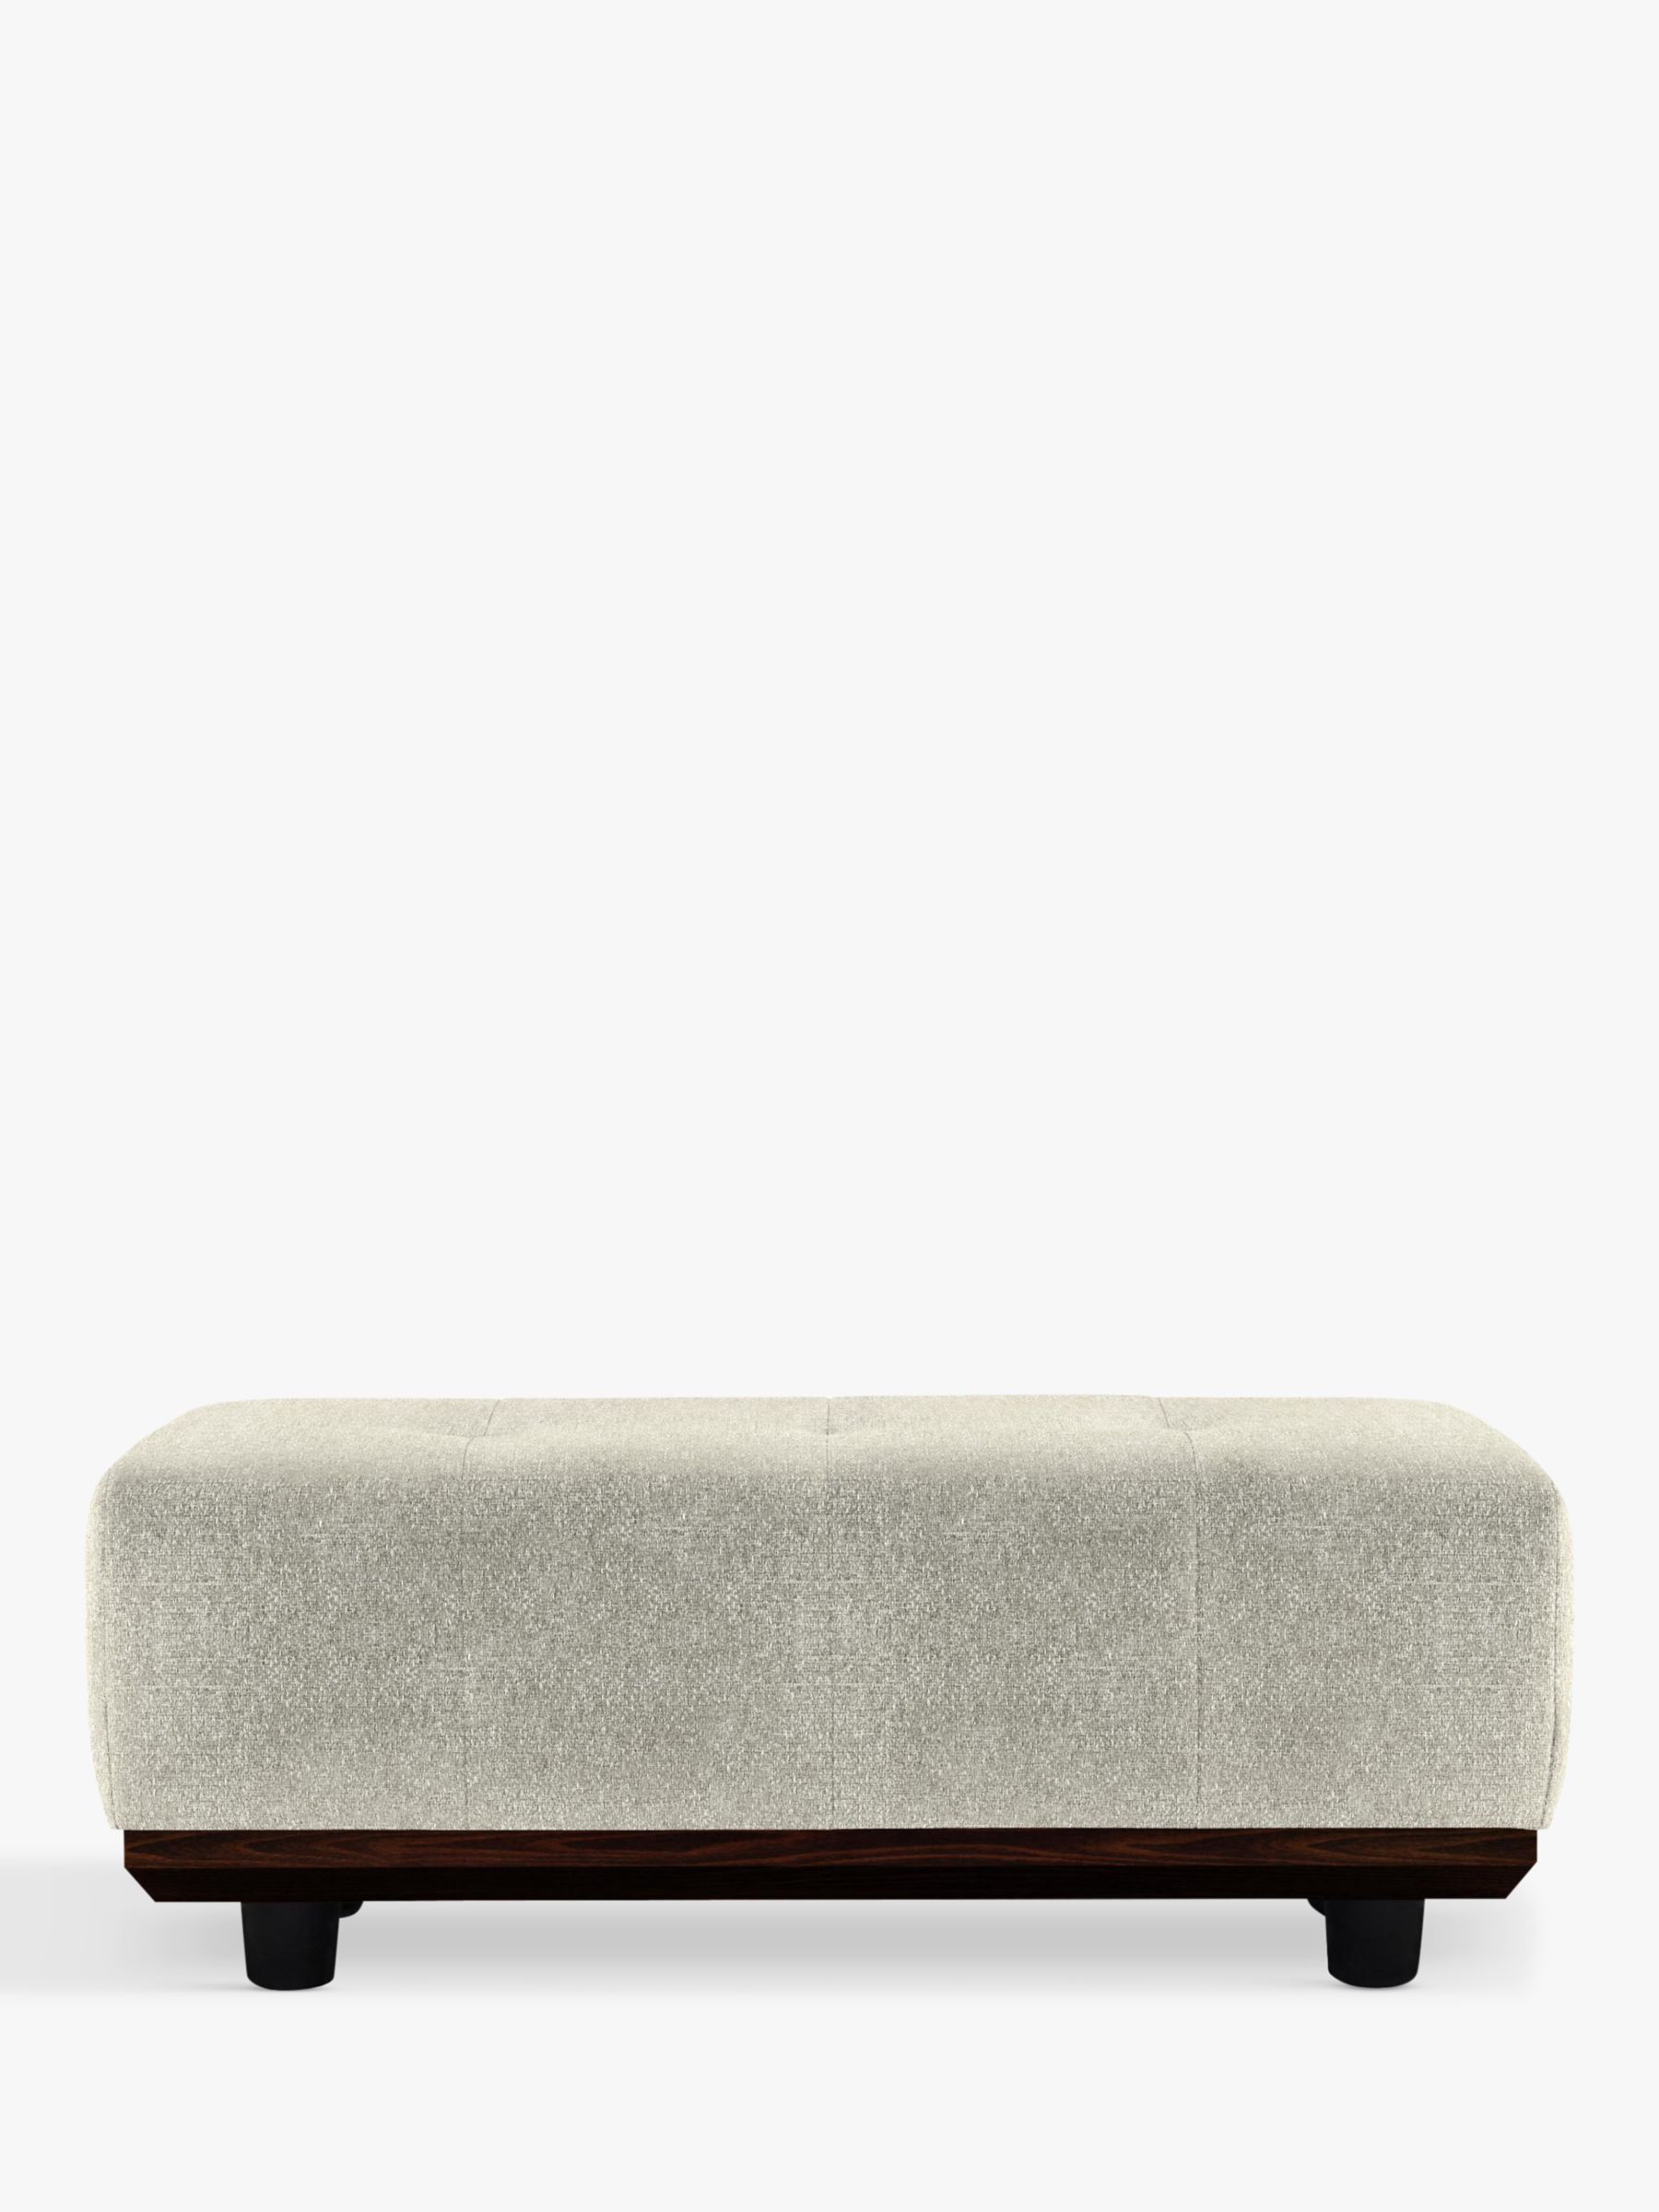 Photo of G plan vintage the seventy one footstool